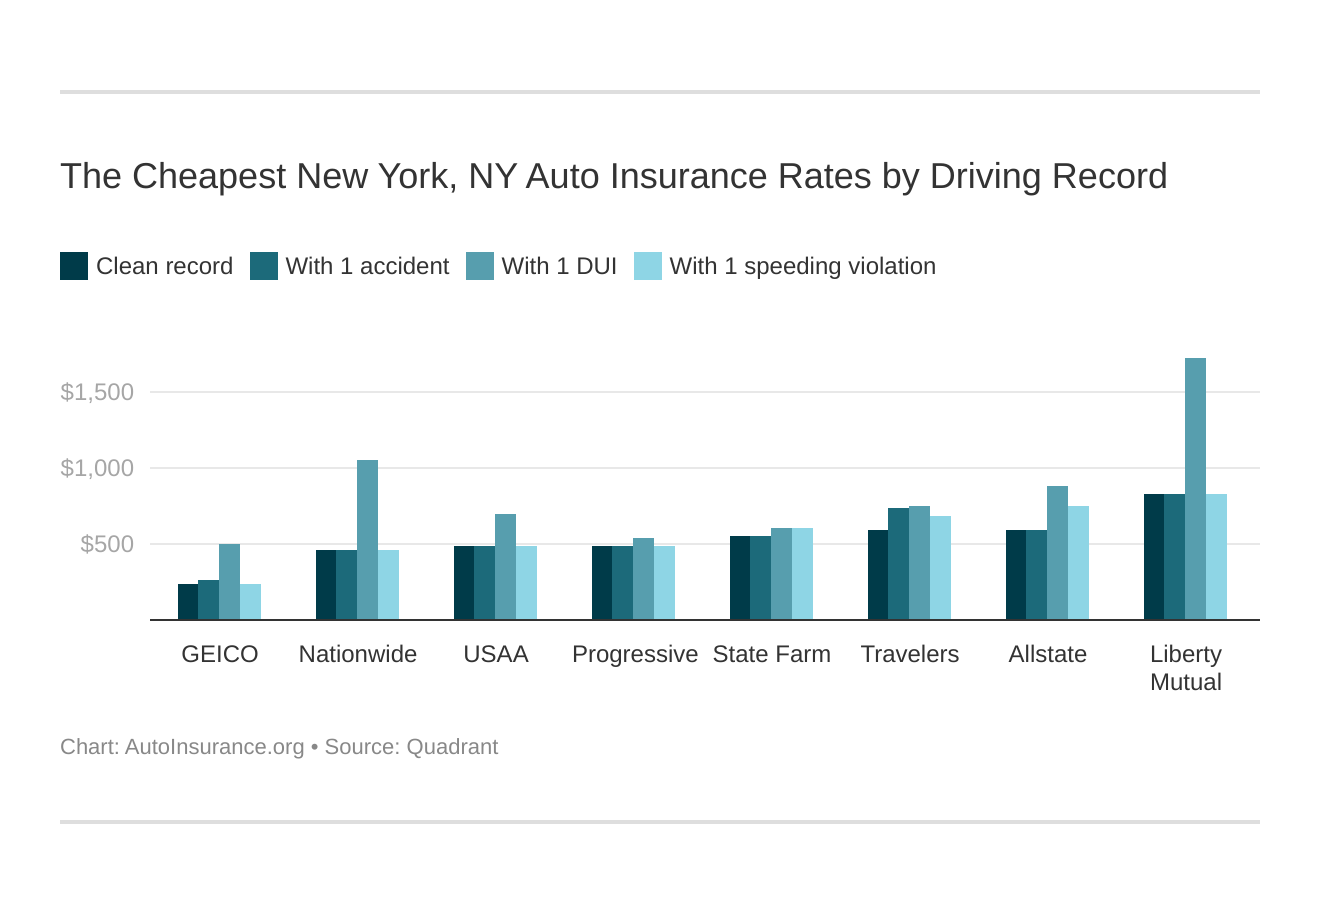 The Cheapest New York, NY Auto Insurance Rates by Driving Record